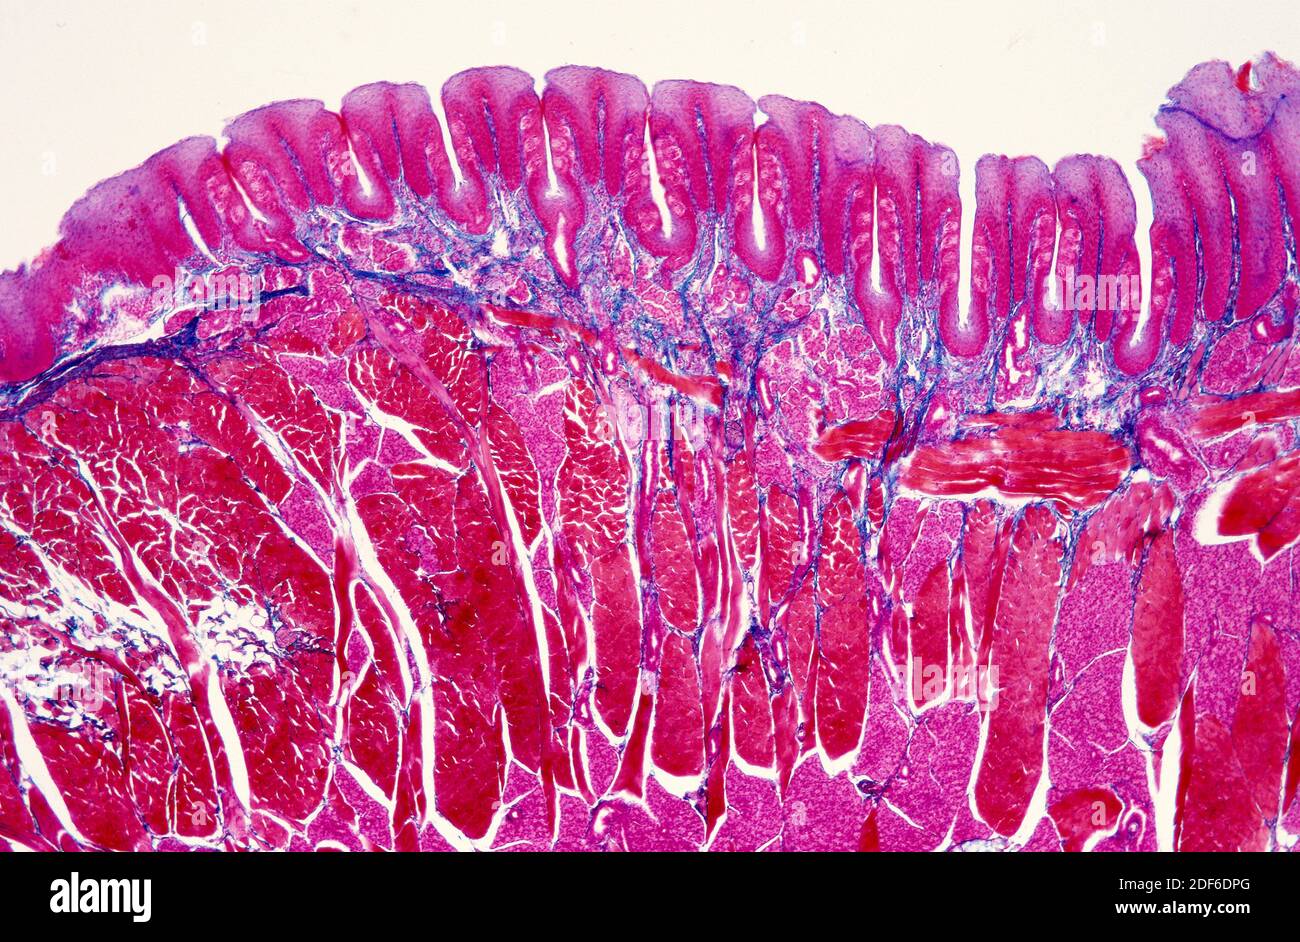 Tongue Muscles Cross Section